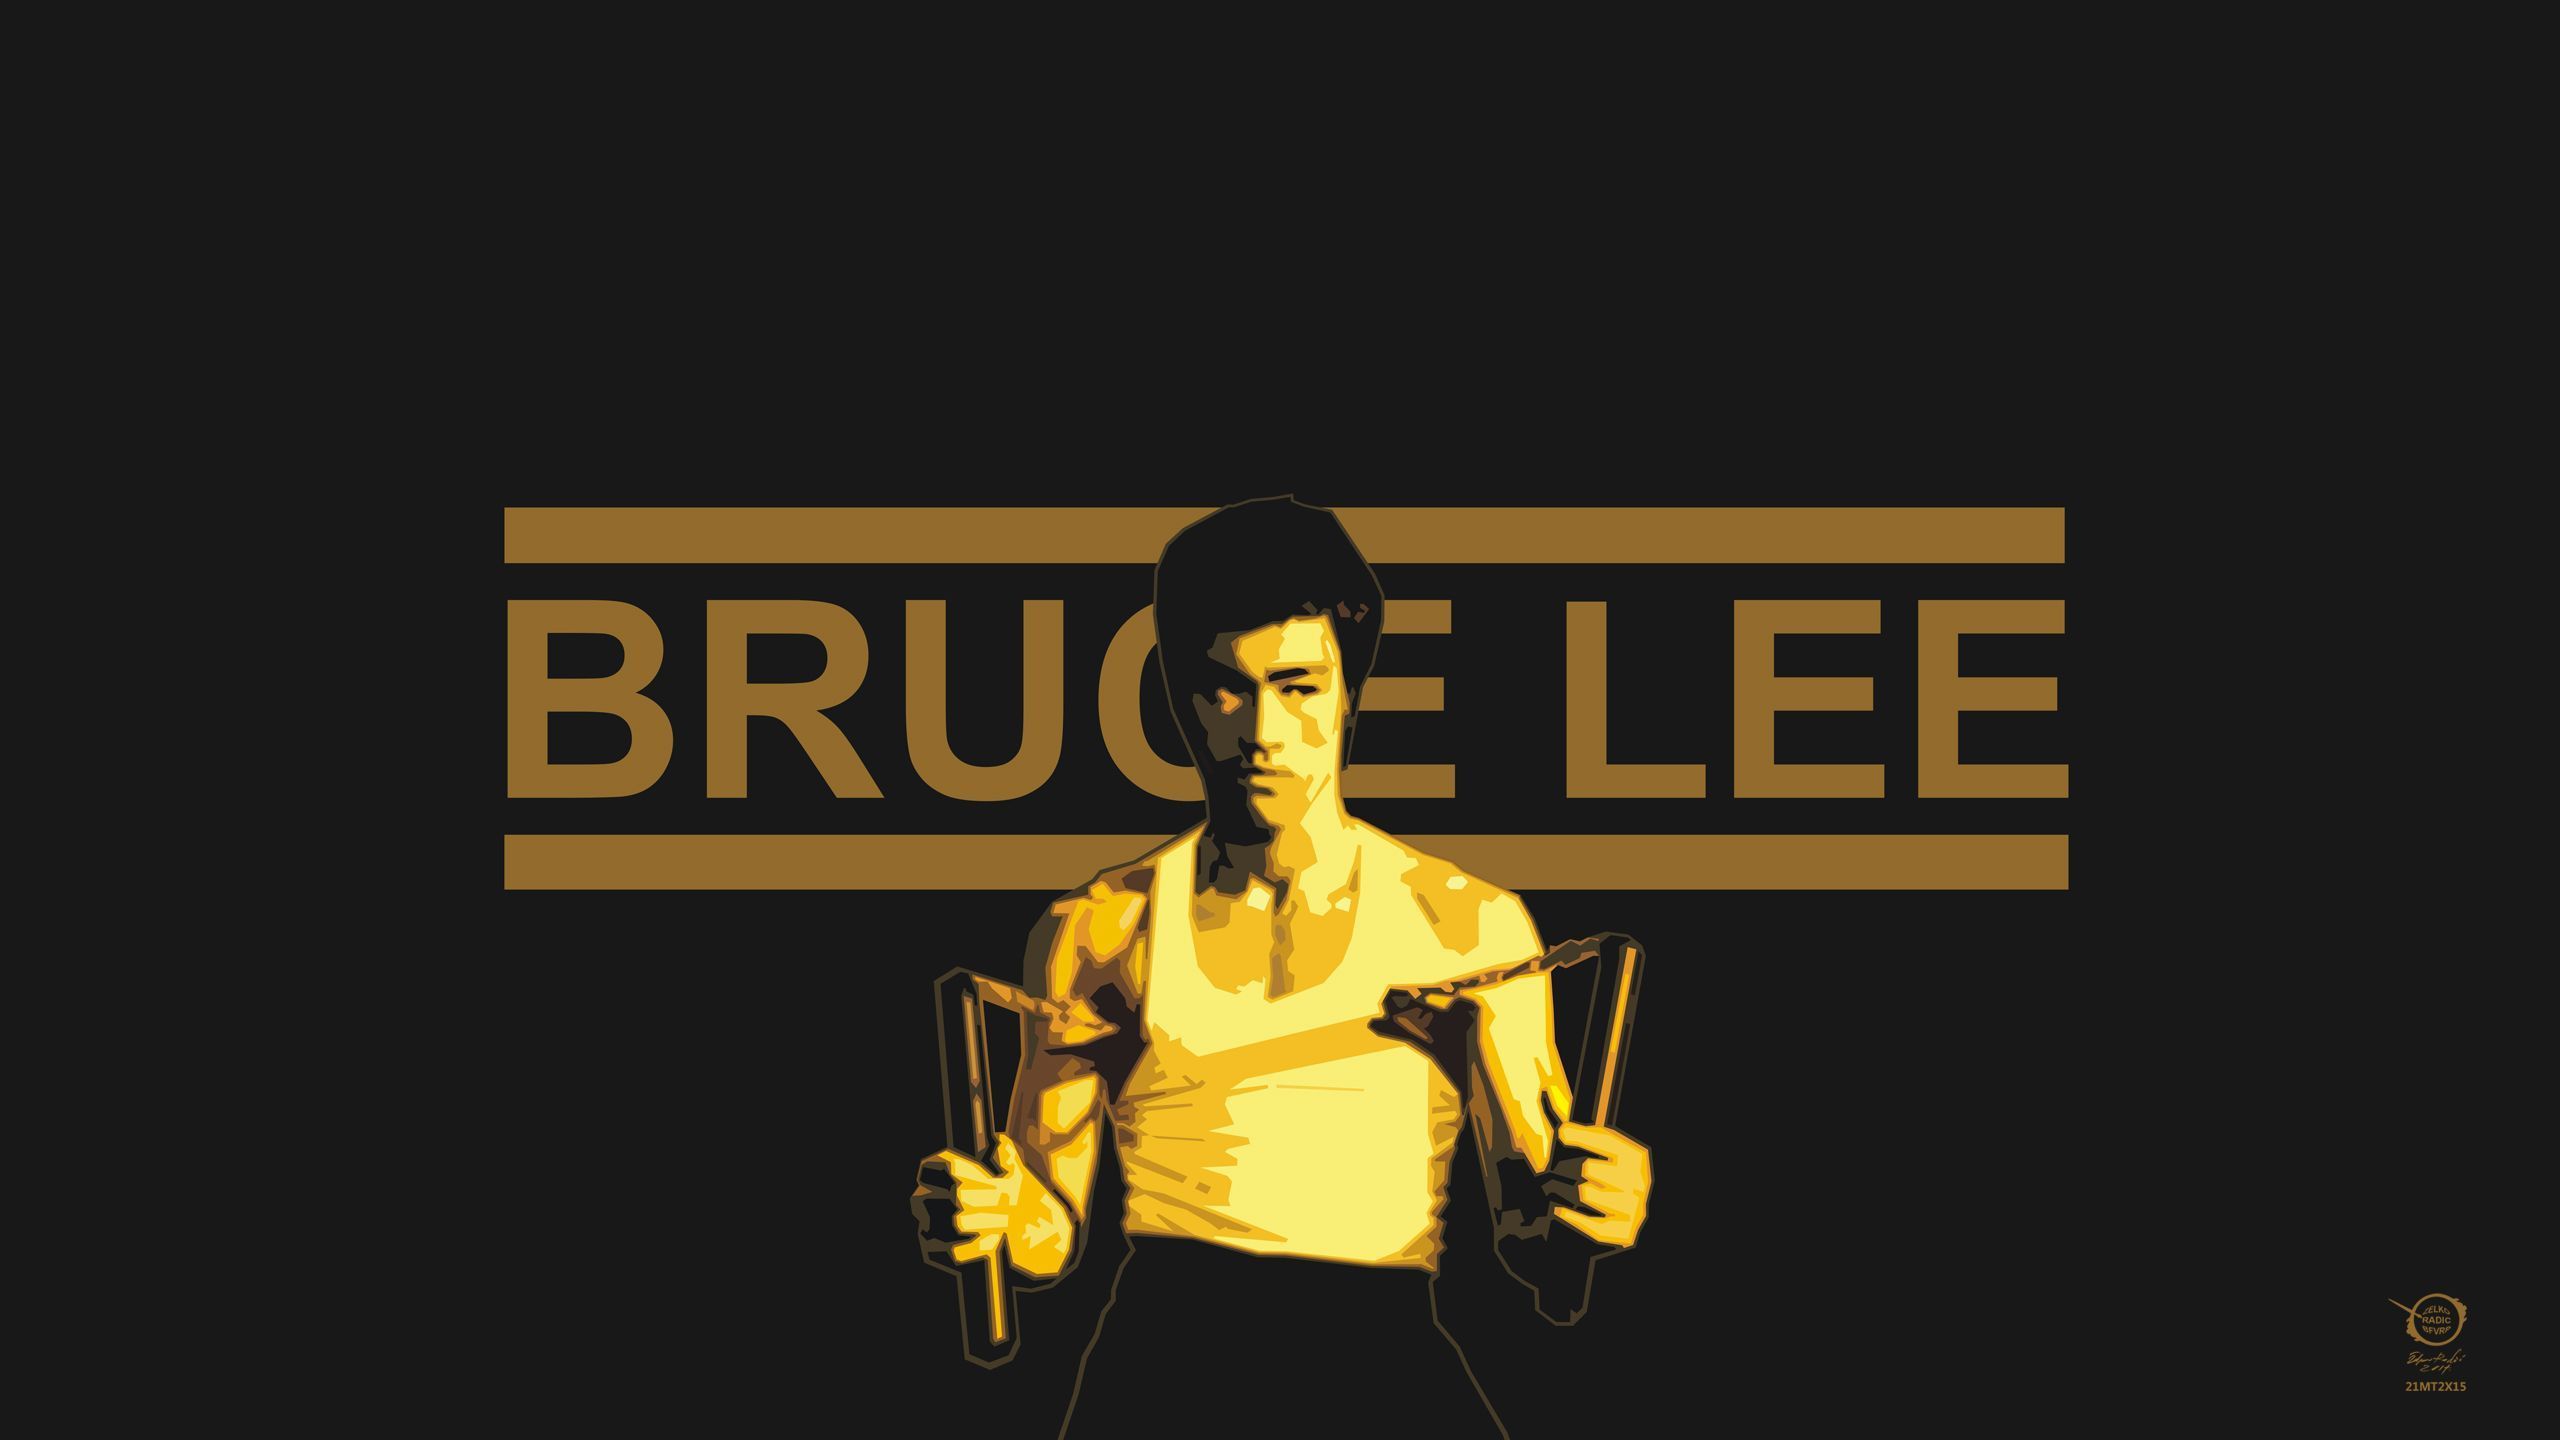 Bruce Lee wallpapers Bruce Lee stock photos